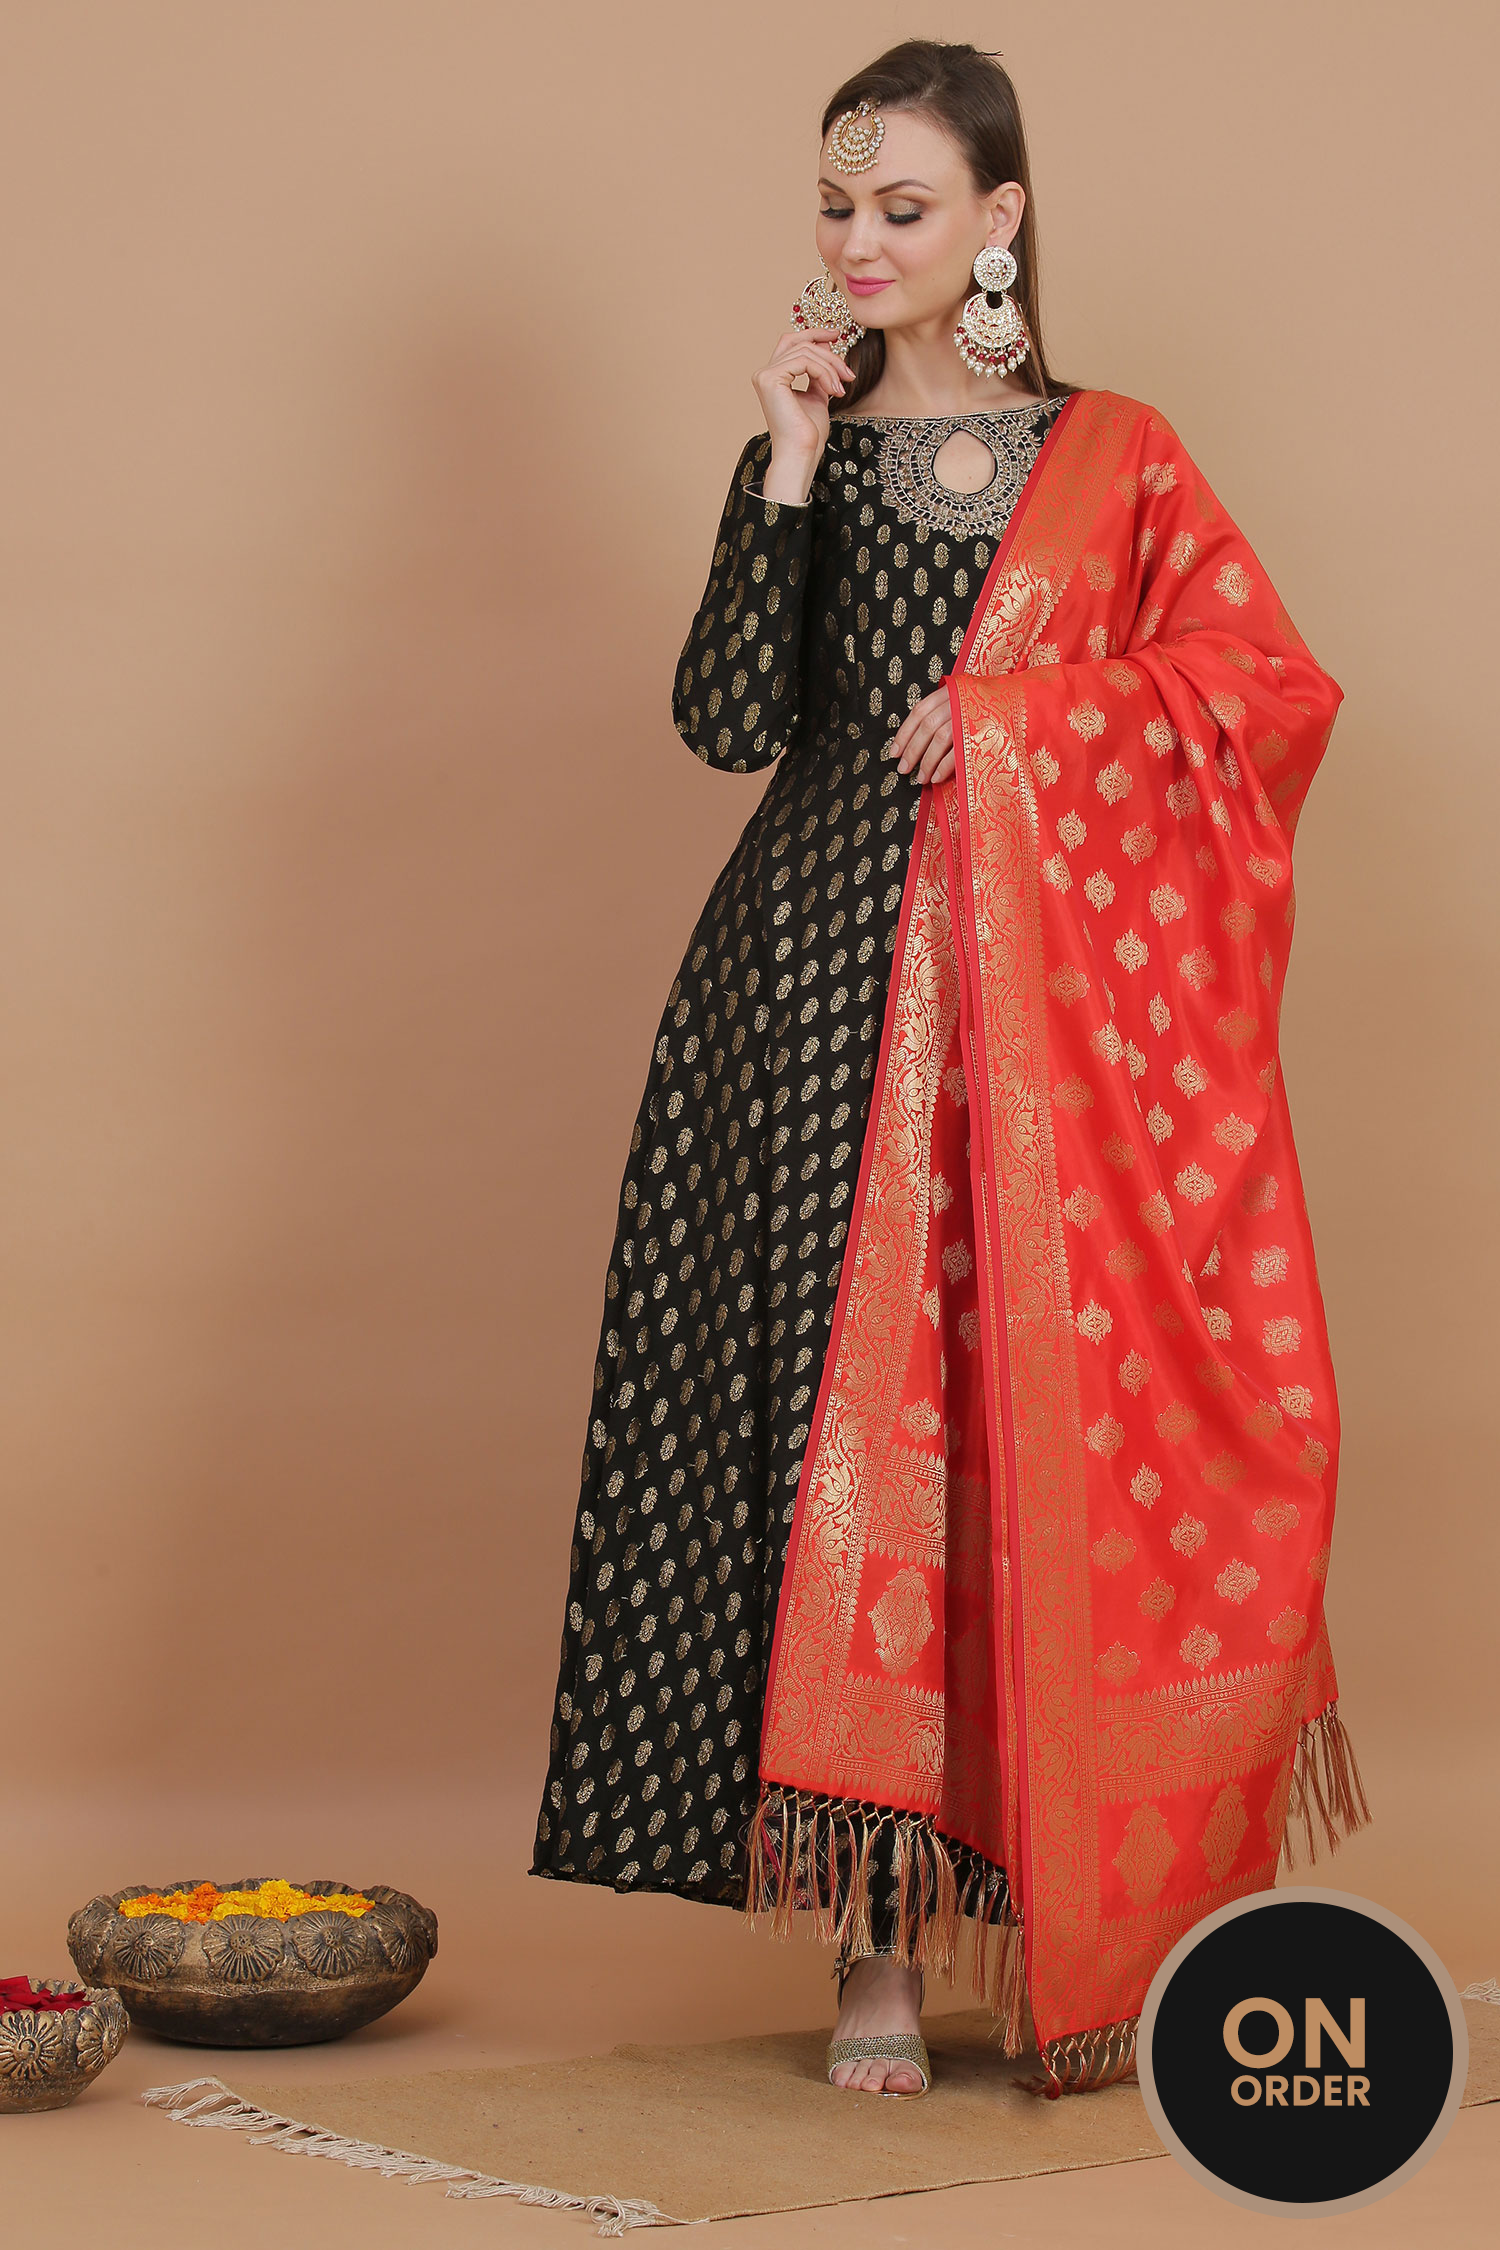 All Time Favourite Banarsi Red Dupatta Suit